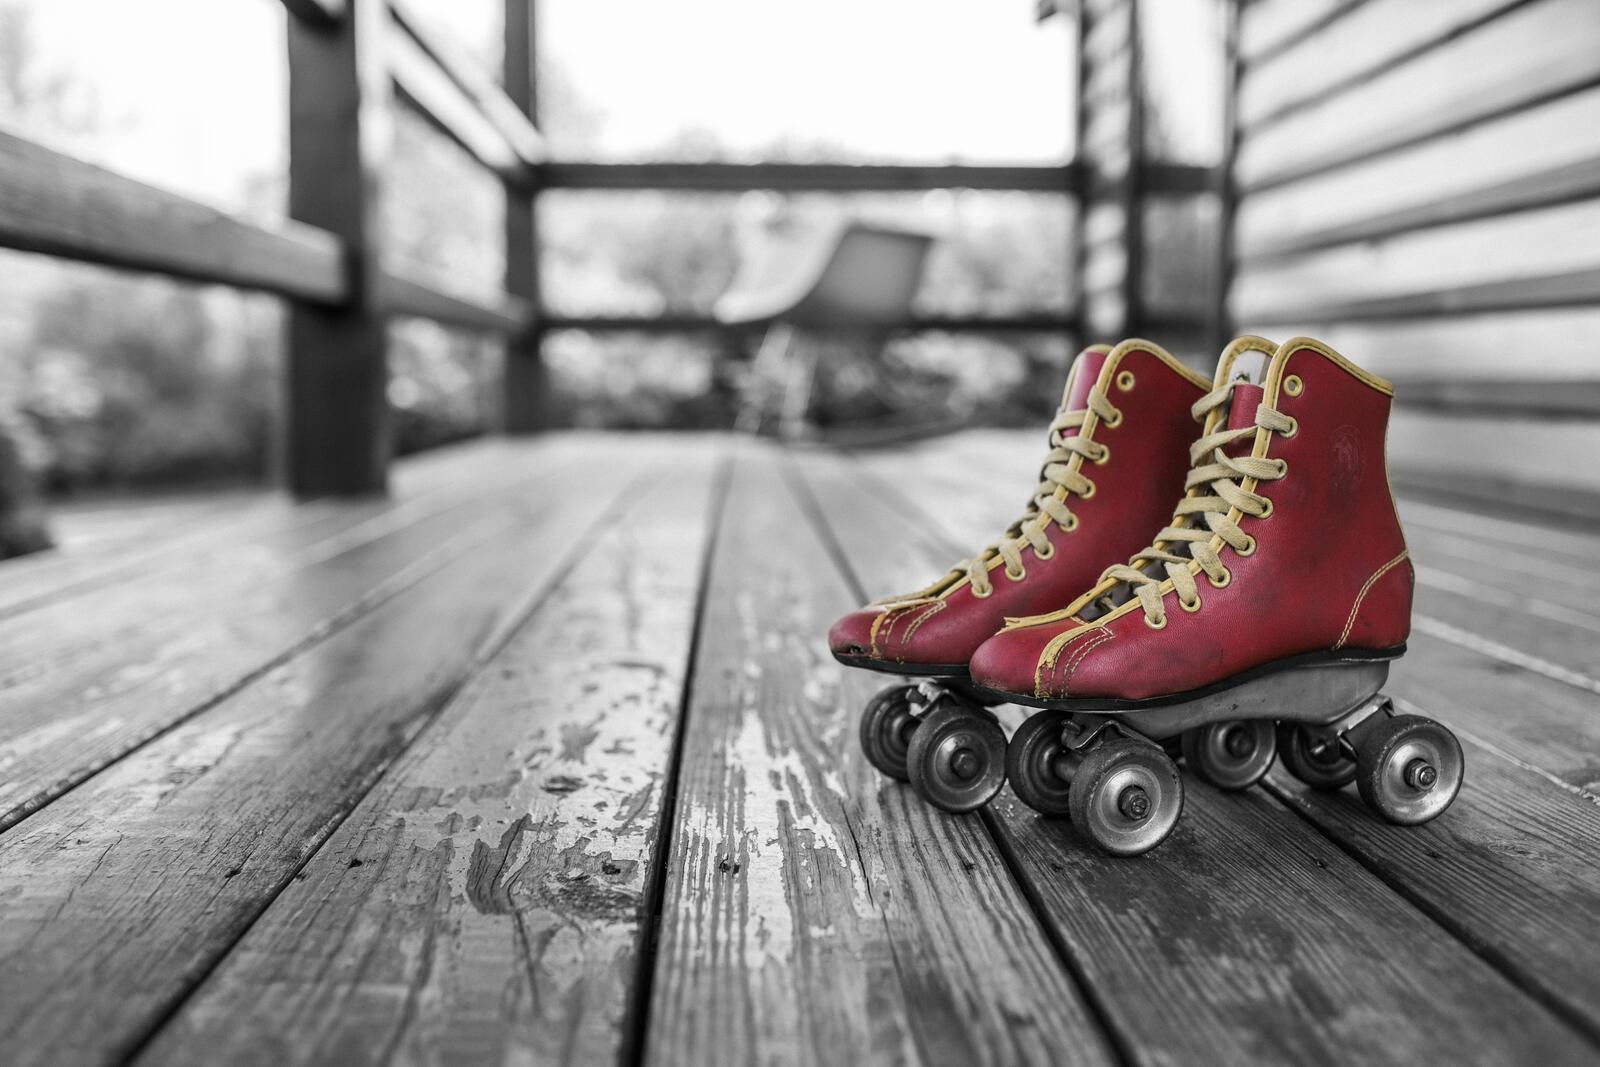 Free photo Old roller skates with wheels